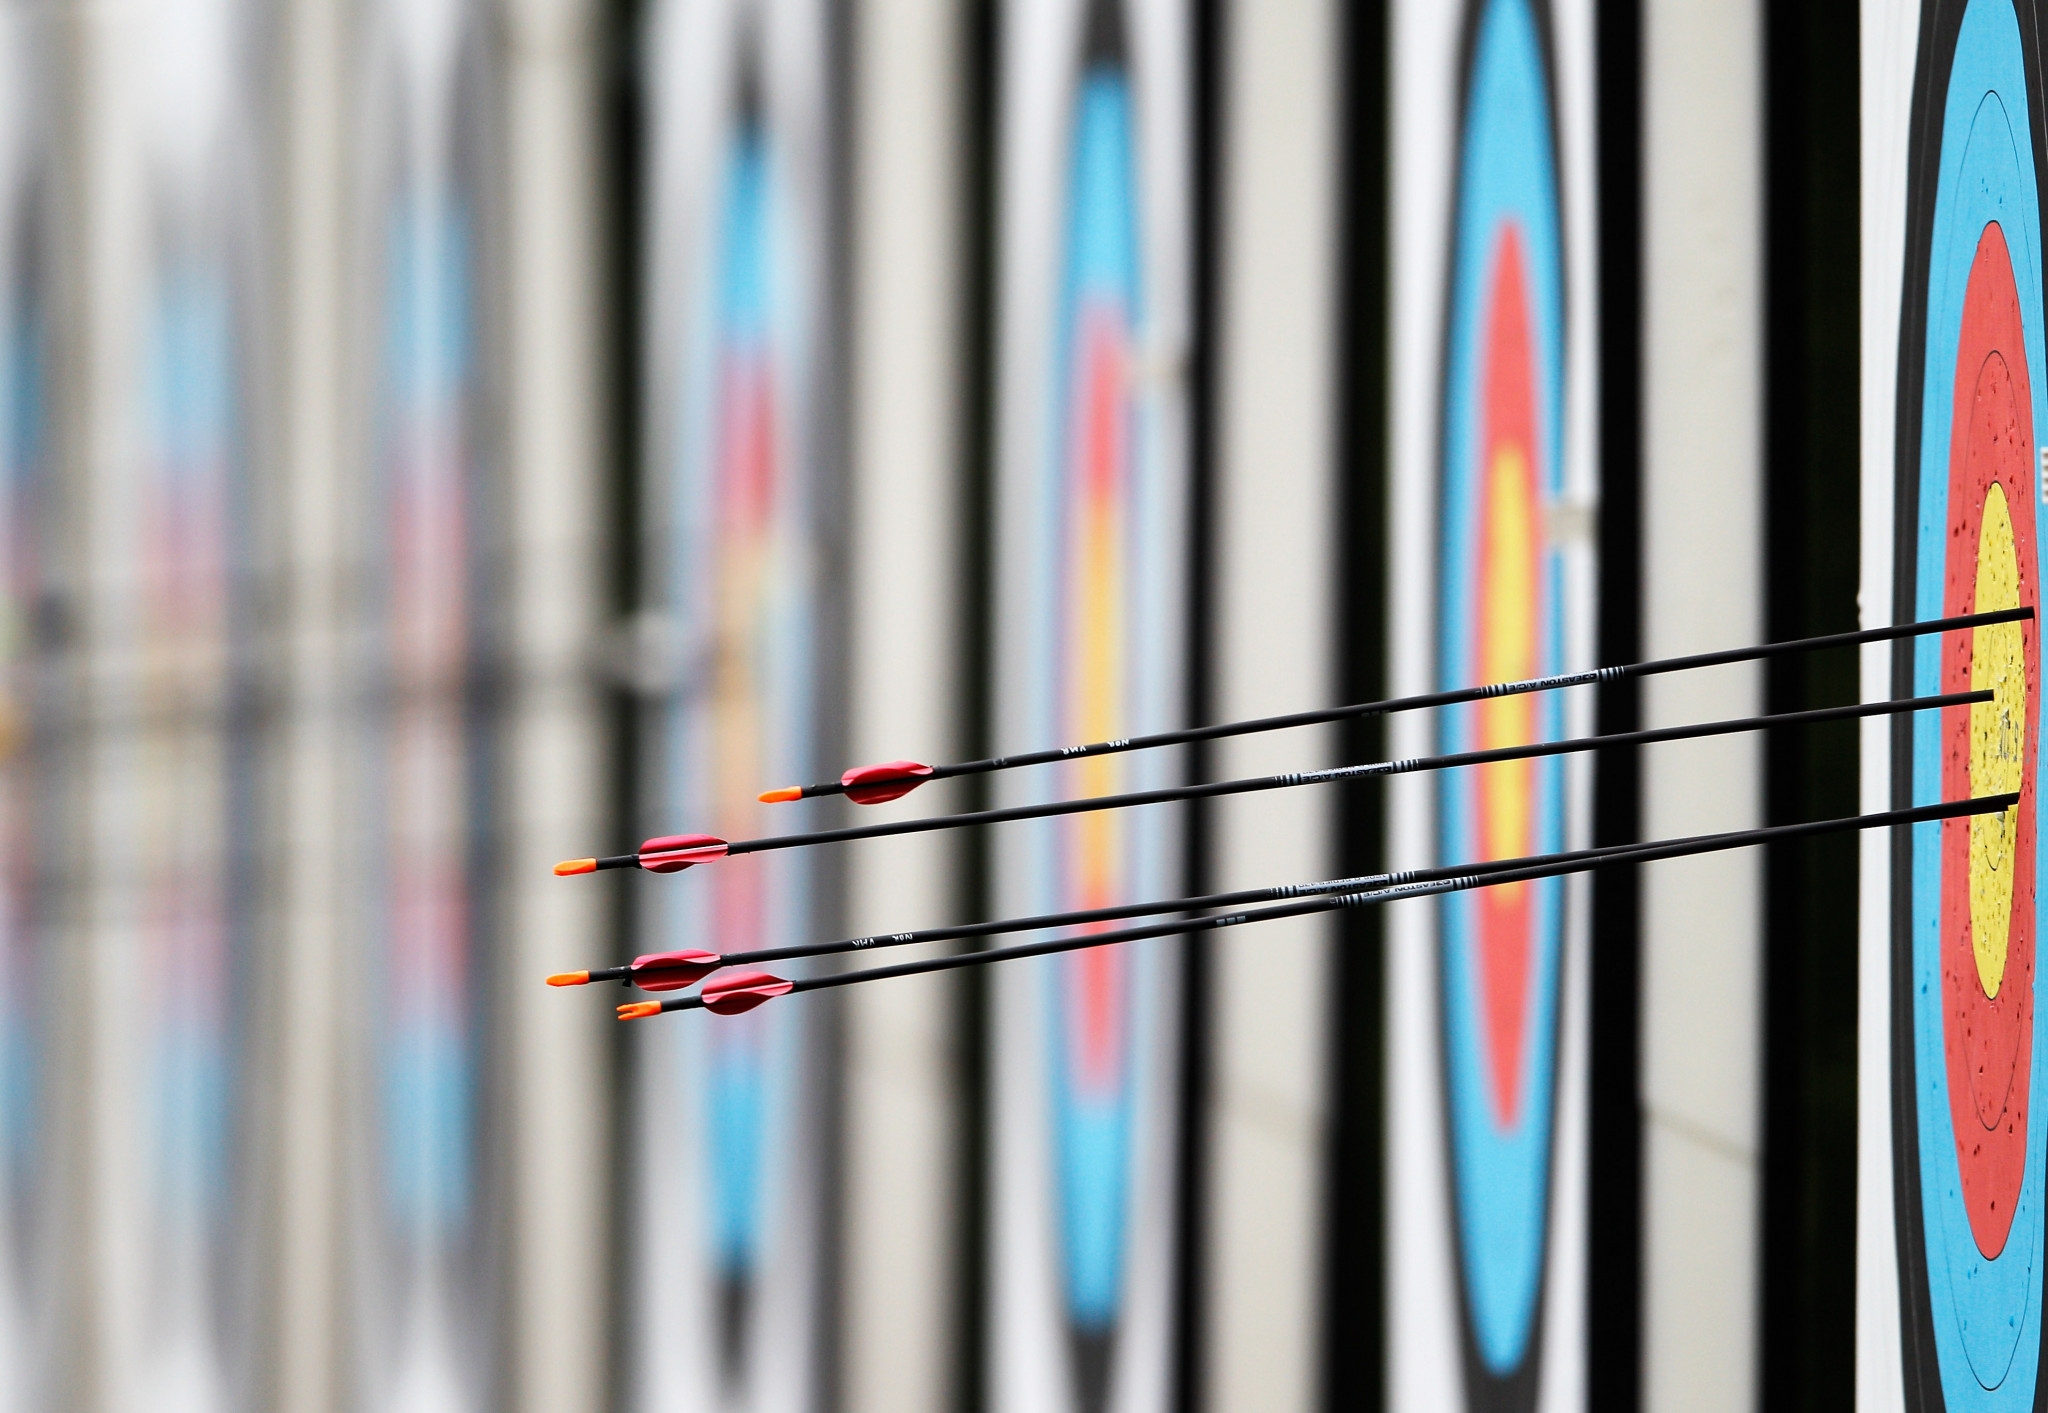 Refract is set to become the esports platform for World Archery until at least 2024 ©Getty Images